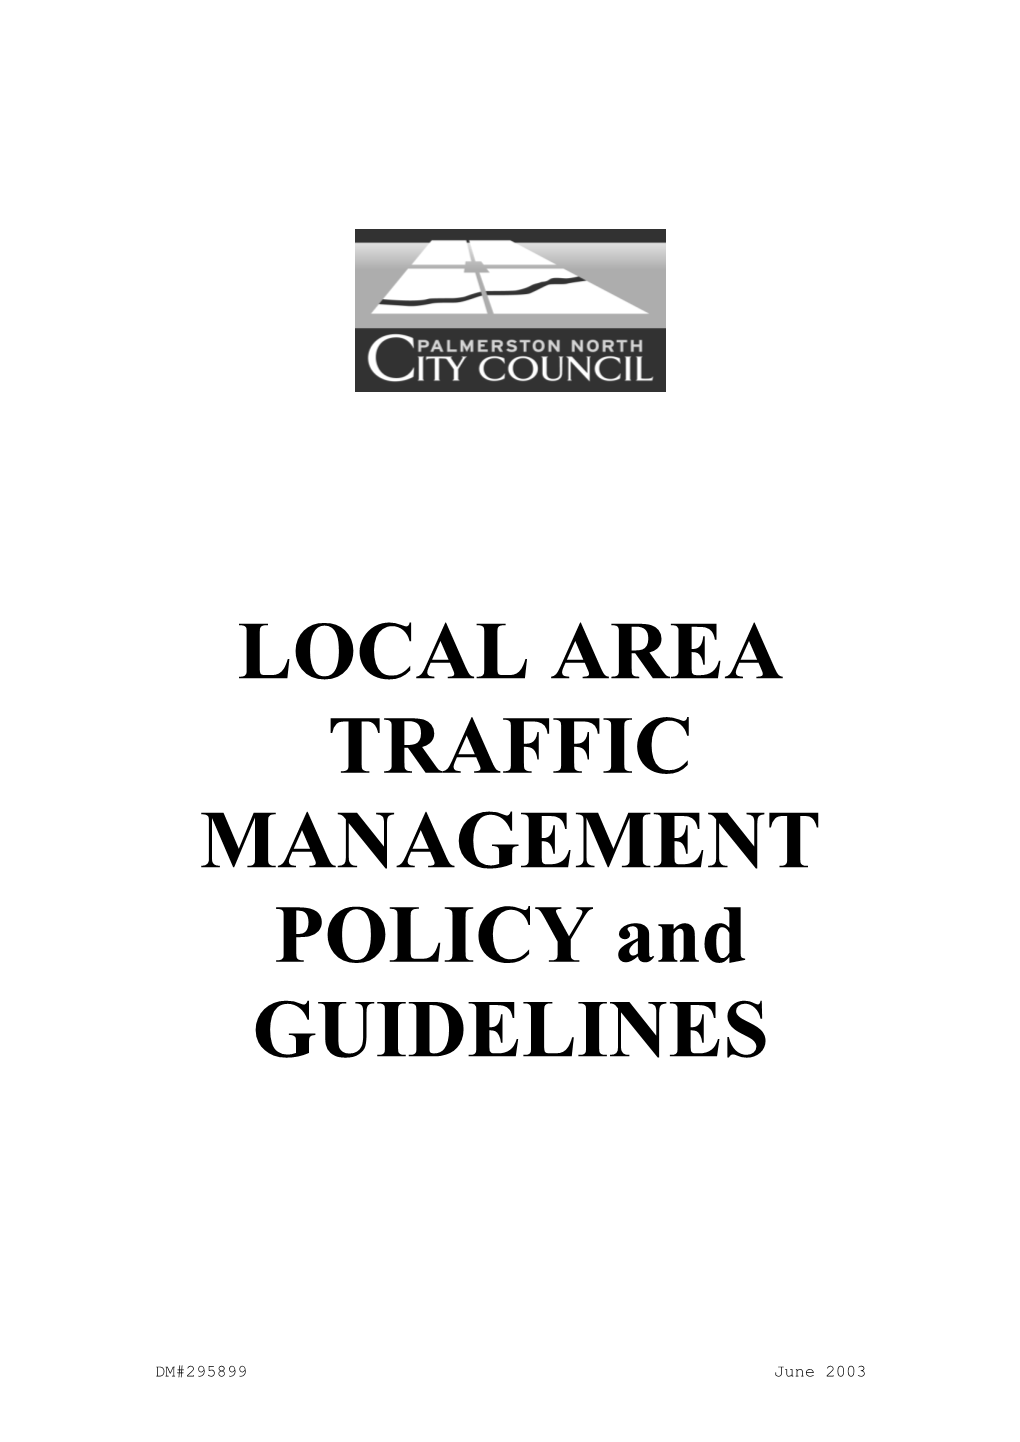 LOCAL AREA TRAFFIC MANAGEMENT POLICY and GUIDELINES